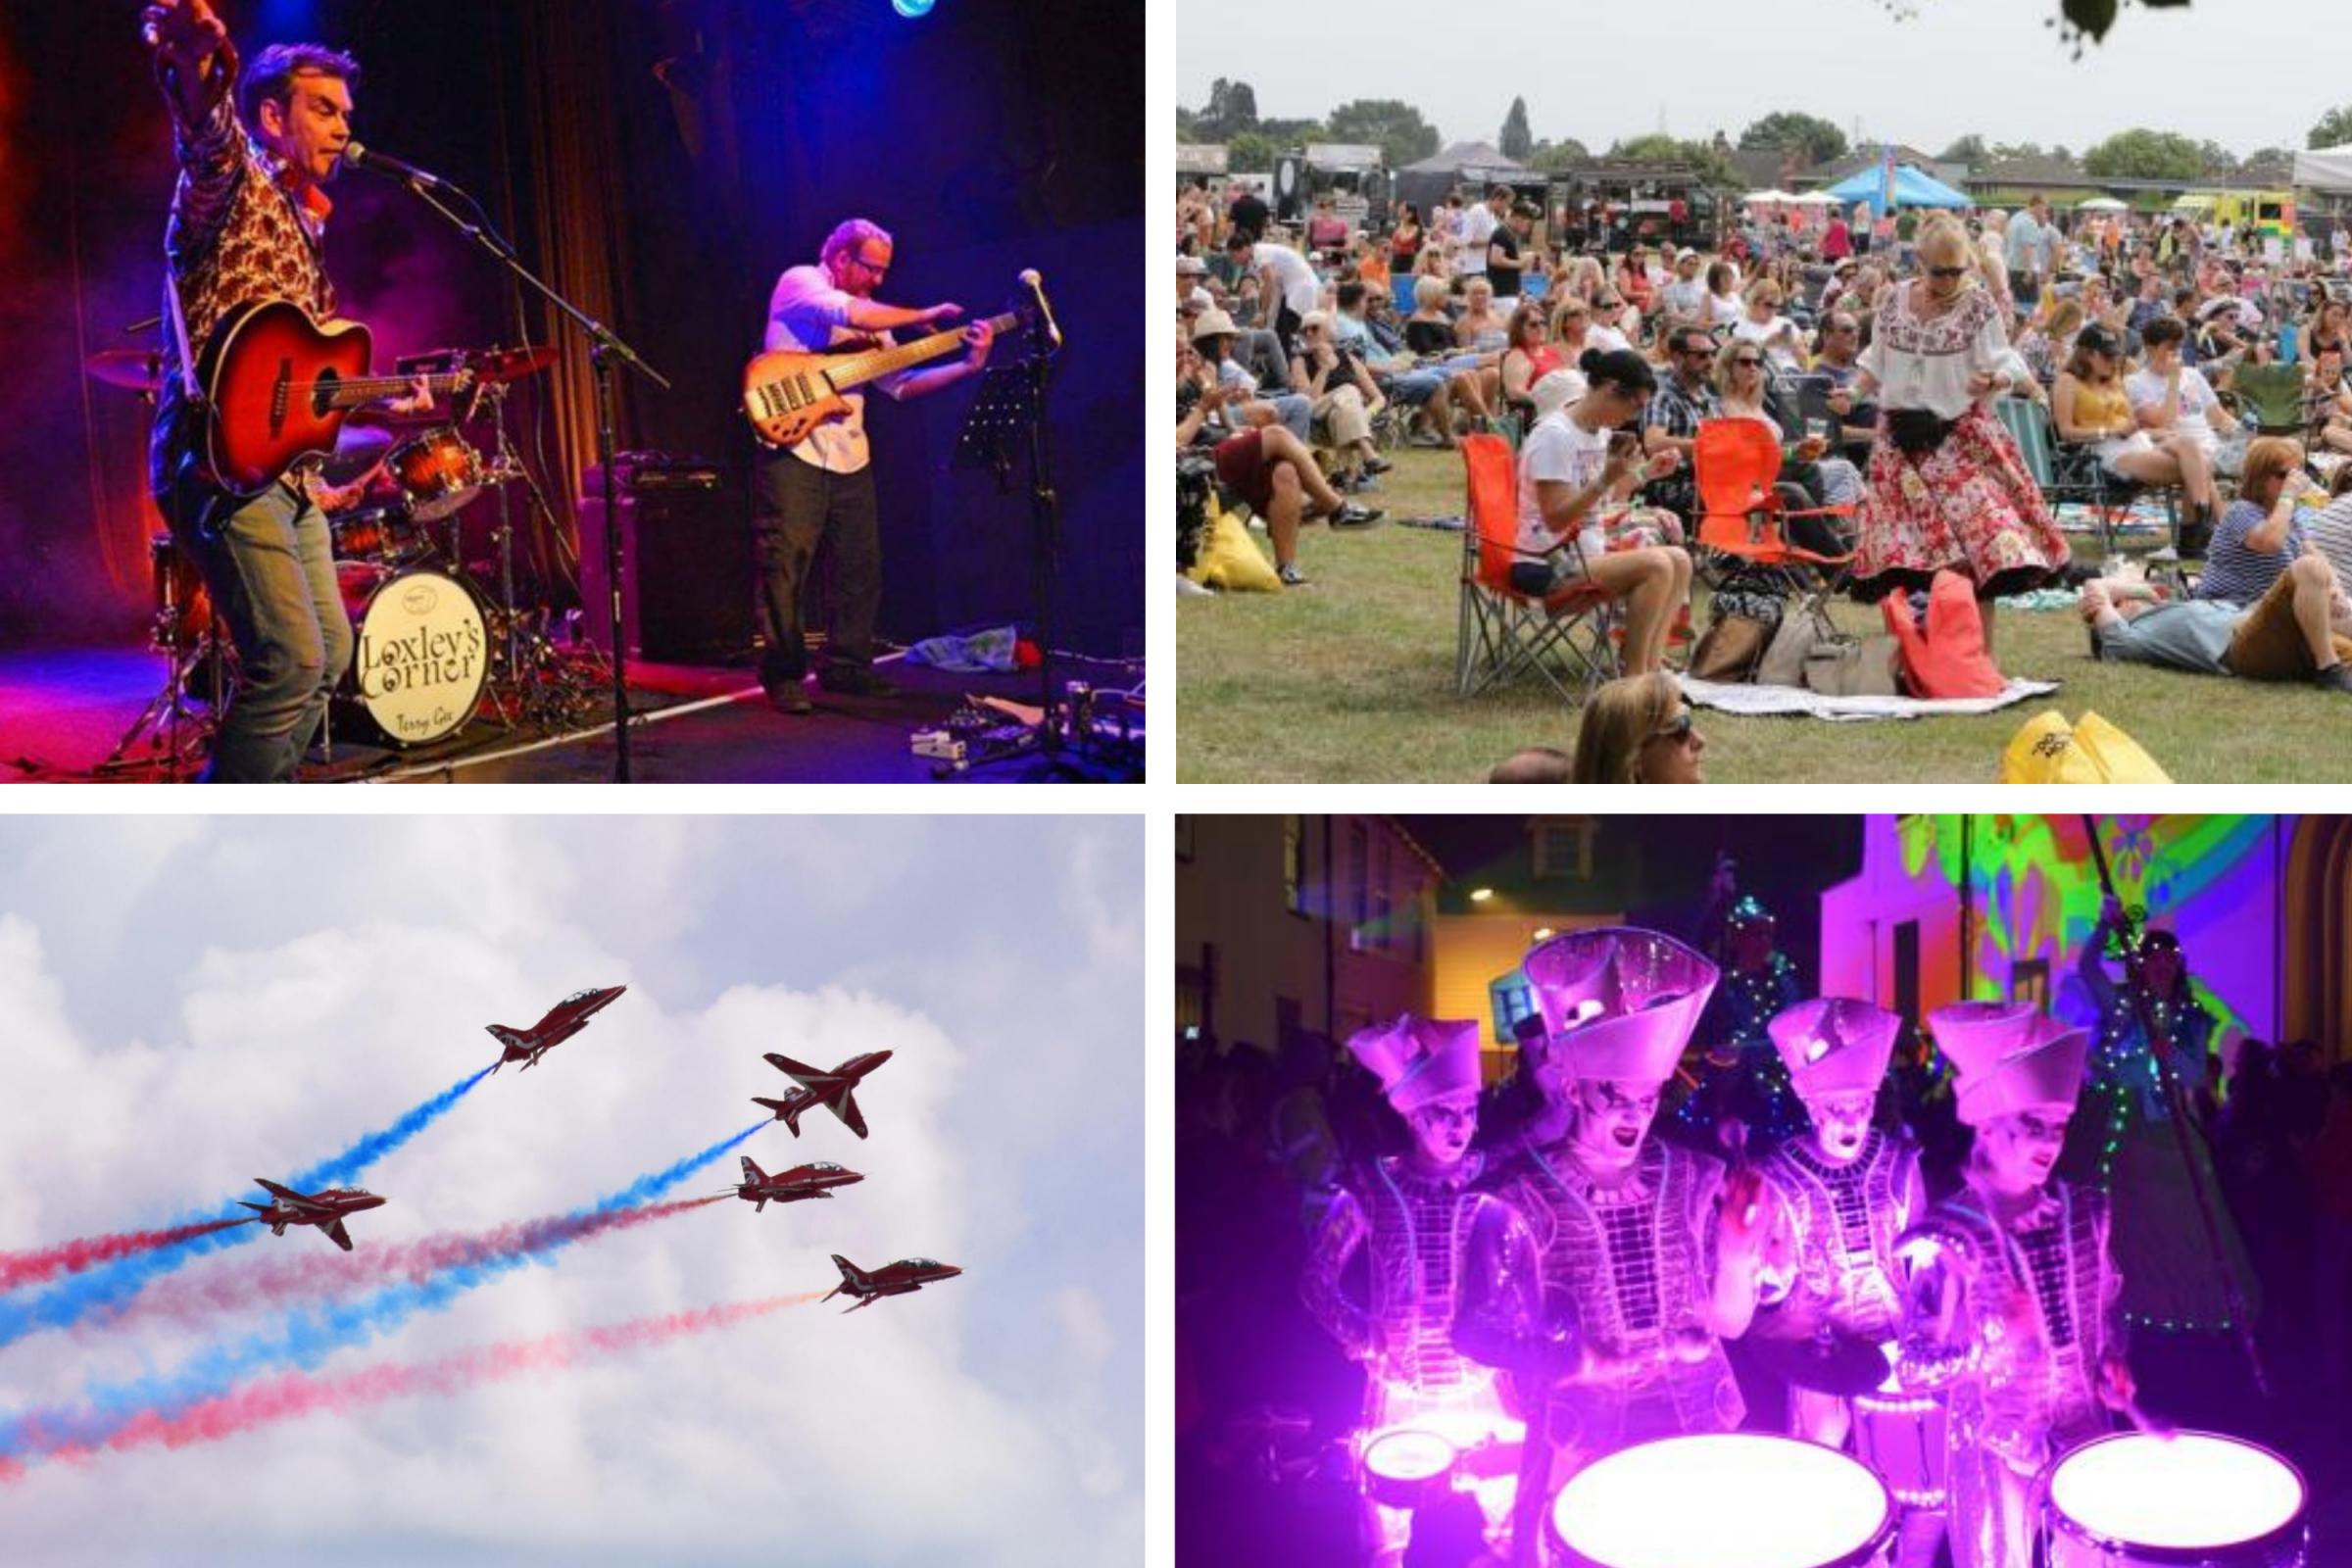 Council offers grants to Tendring's event organisers